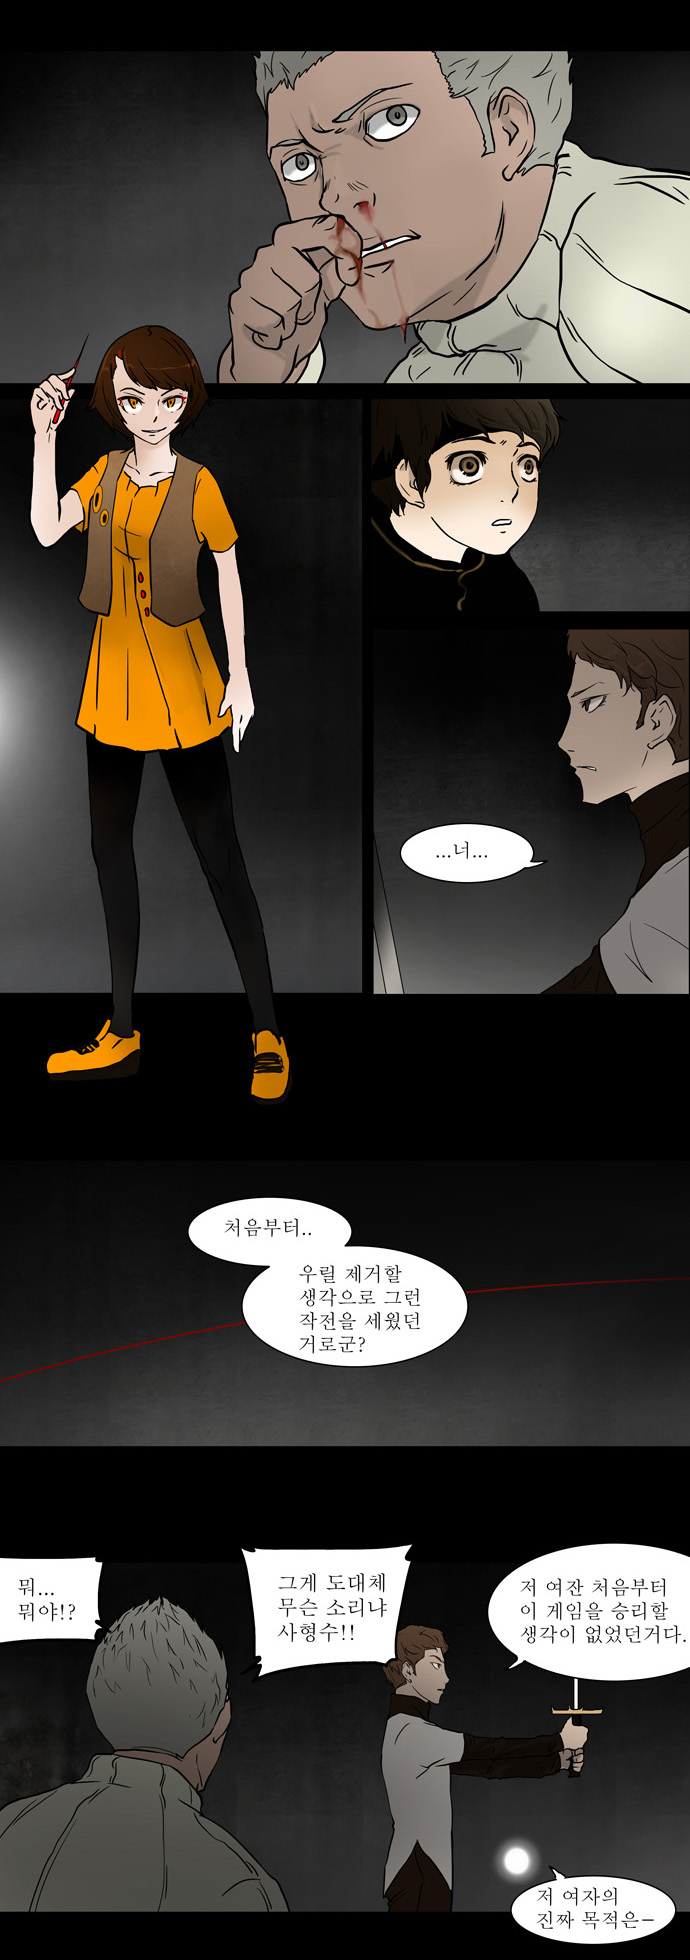 Tower of God - Chapter 46 - Page 2